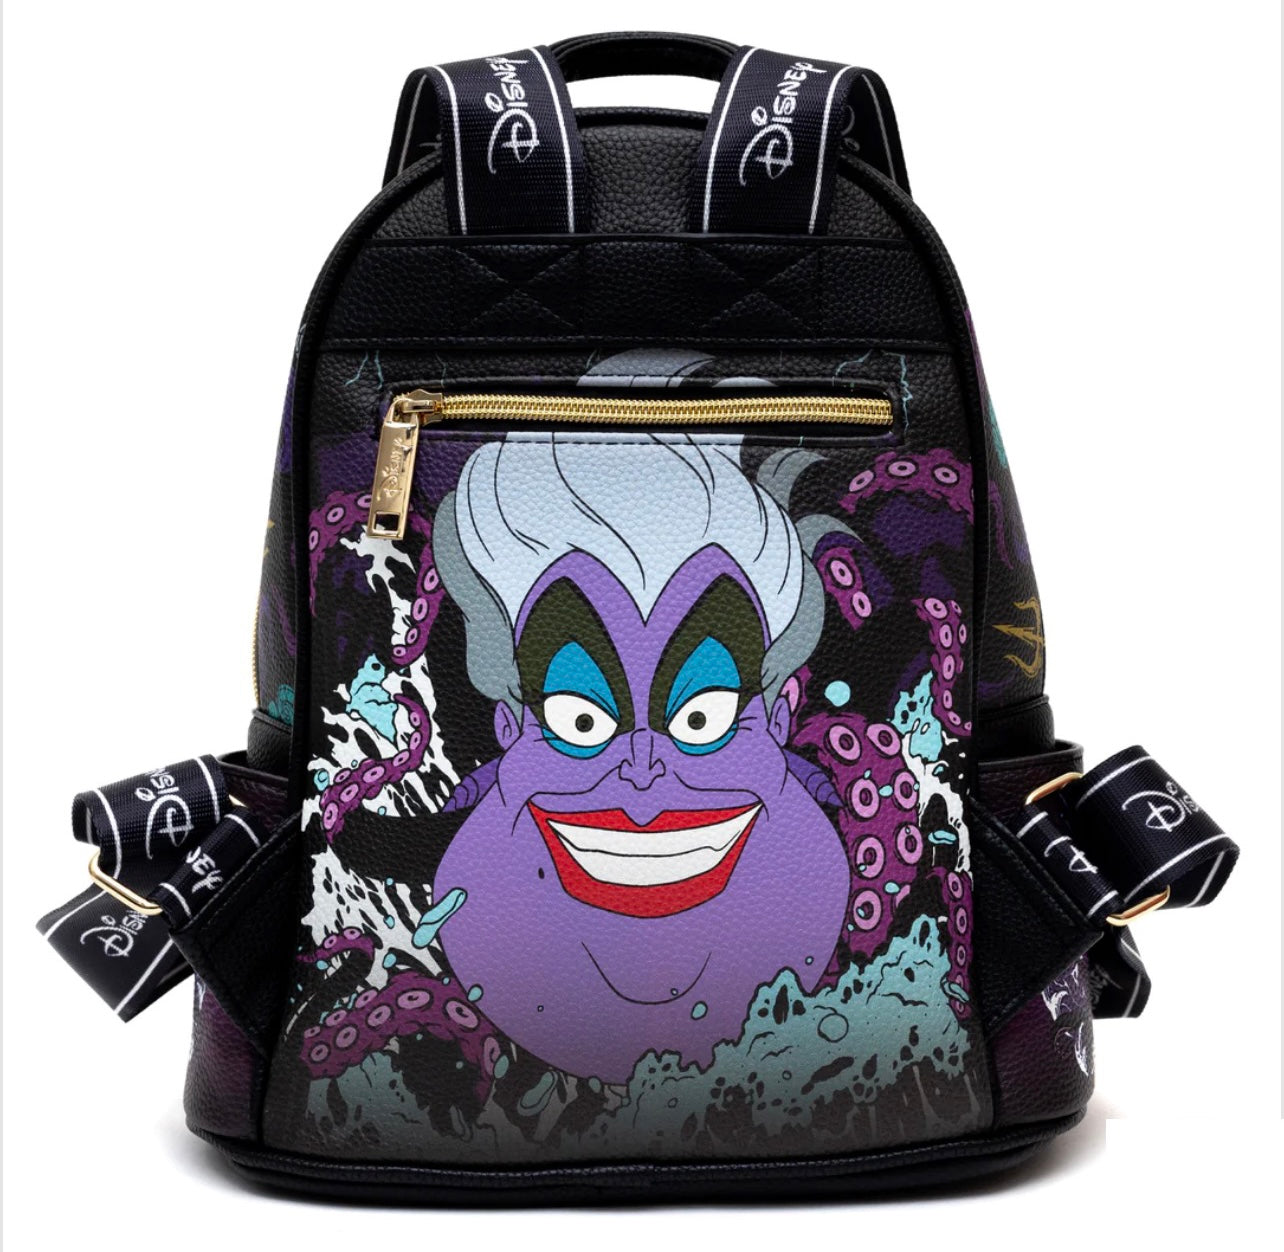 Exclusive Limited Edition -Ursula Vegan Leather Backpack